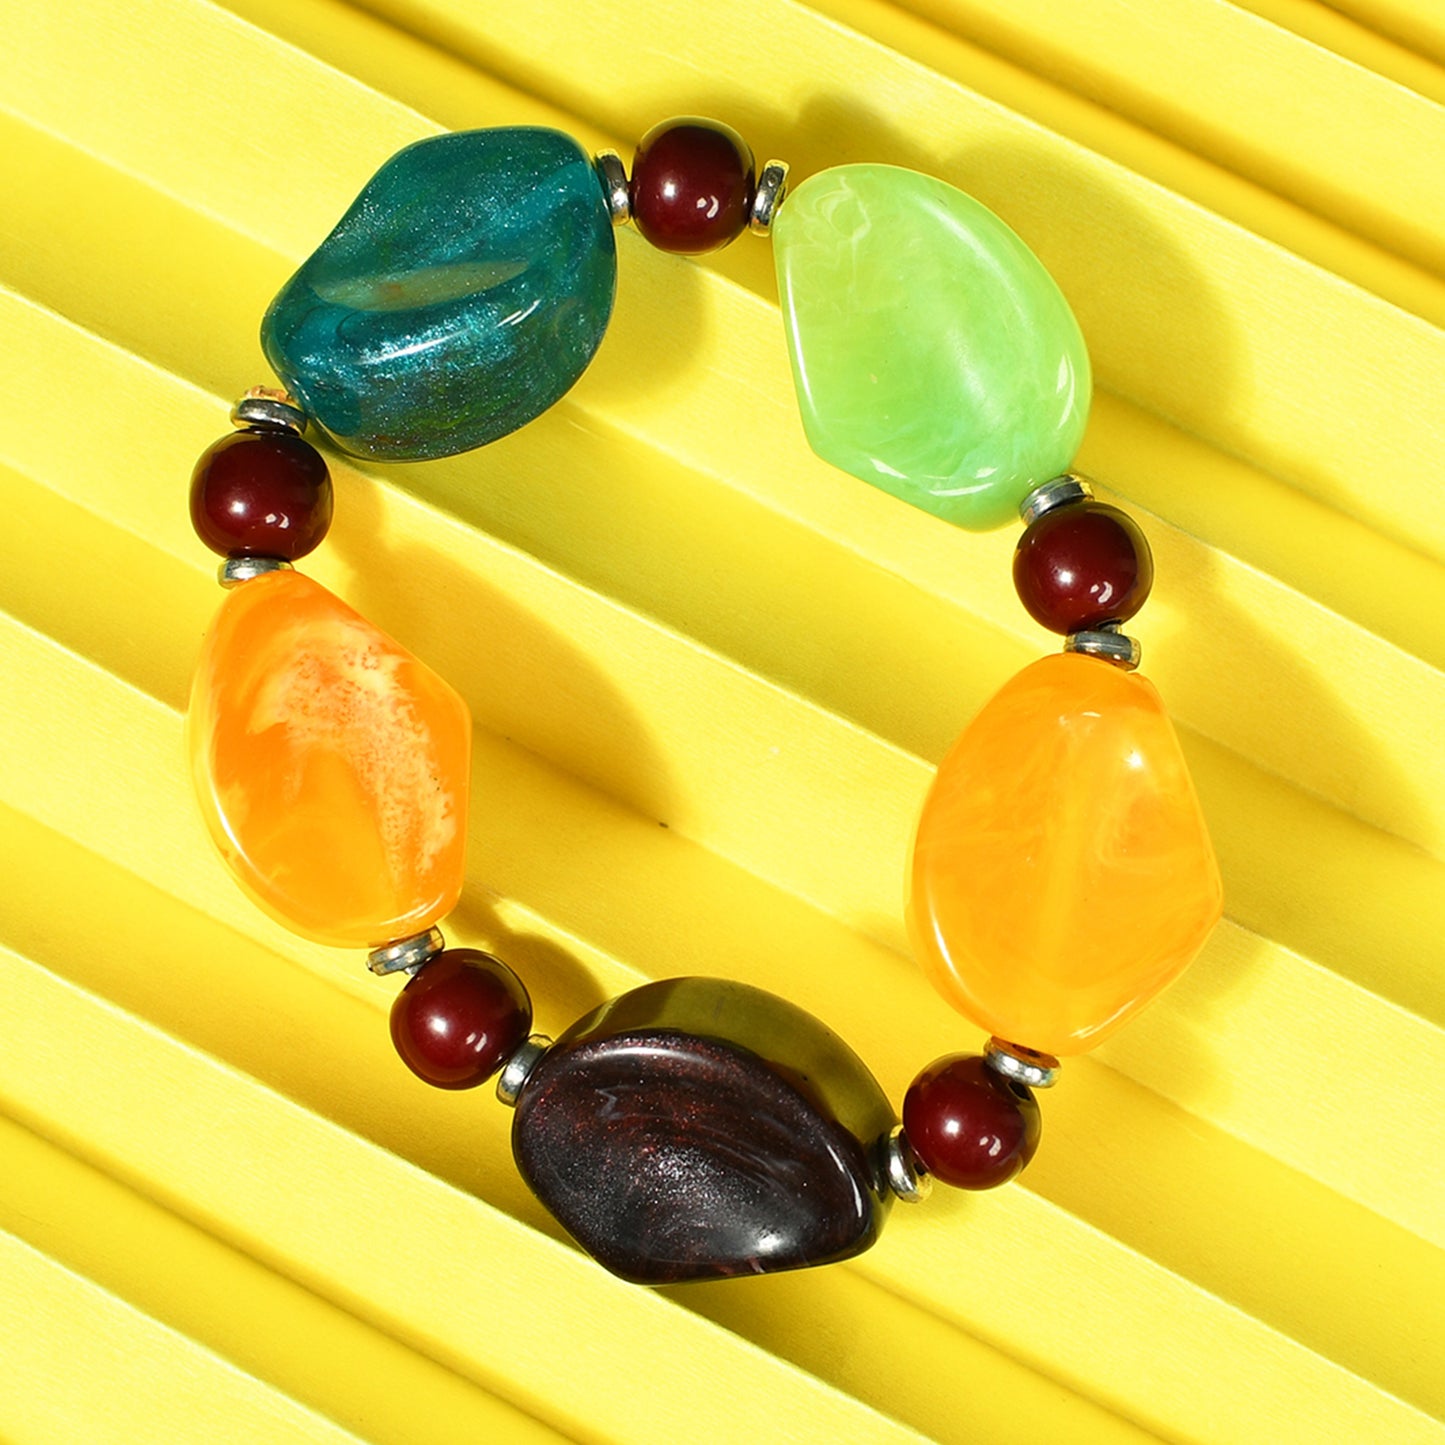 Multi-Coloured Stone Stretchable Bracelet by Bamboo Tree Jewels